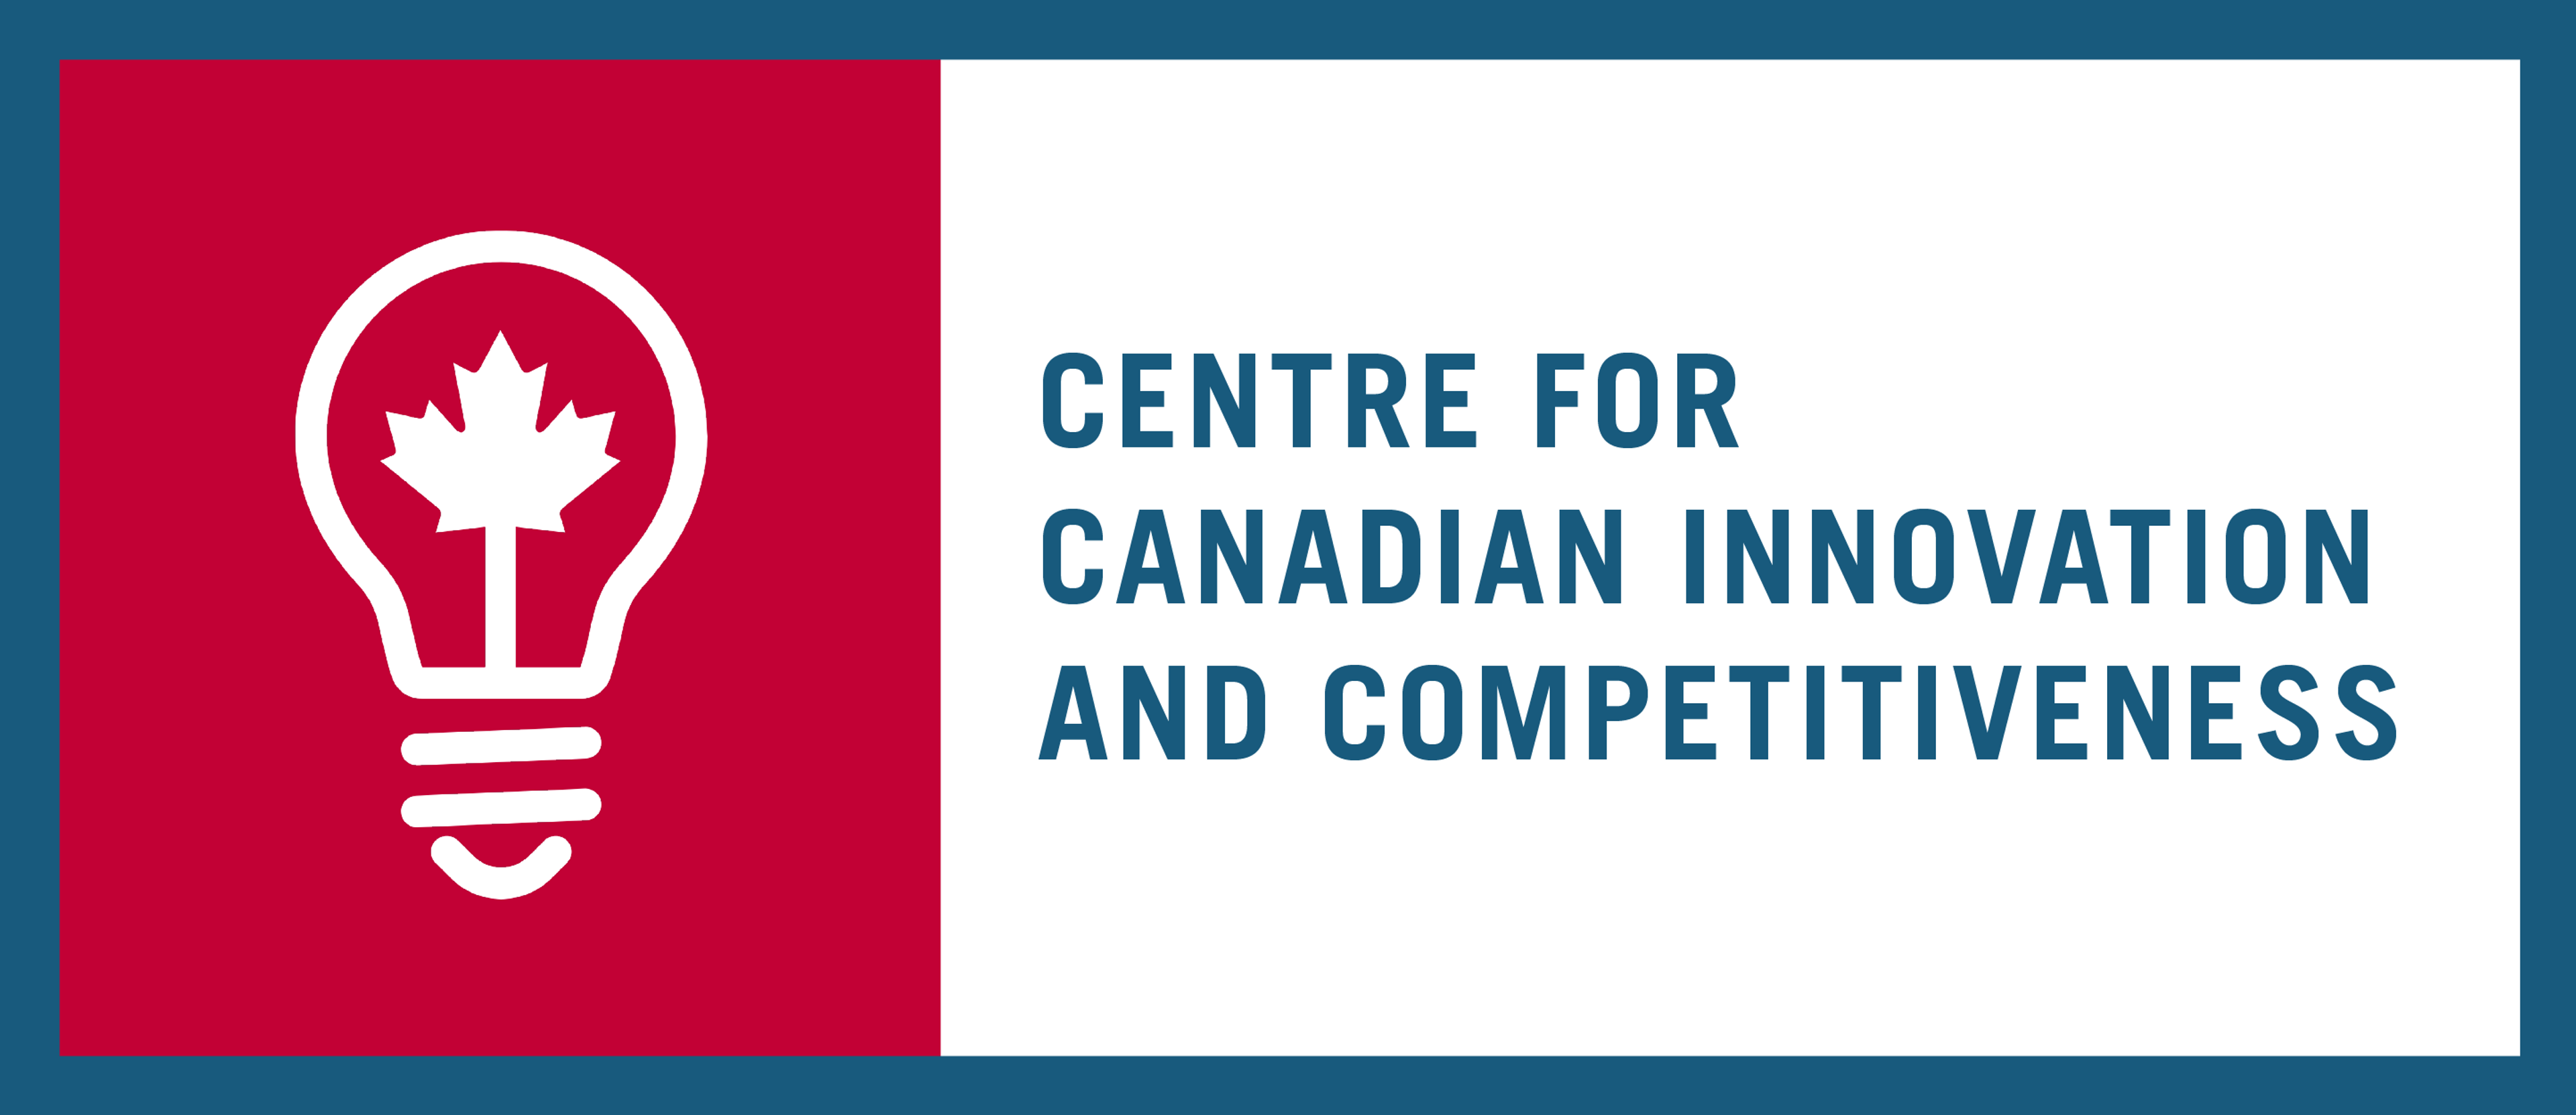 Centre for Canadian Innovation and Competitiveness